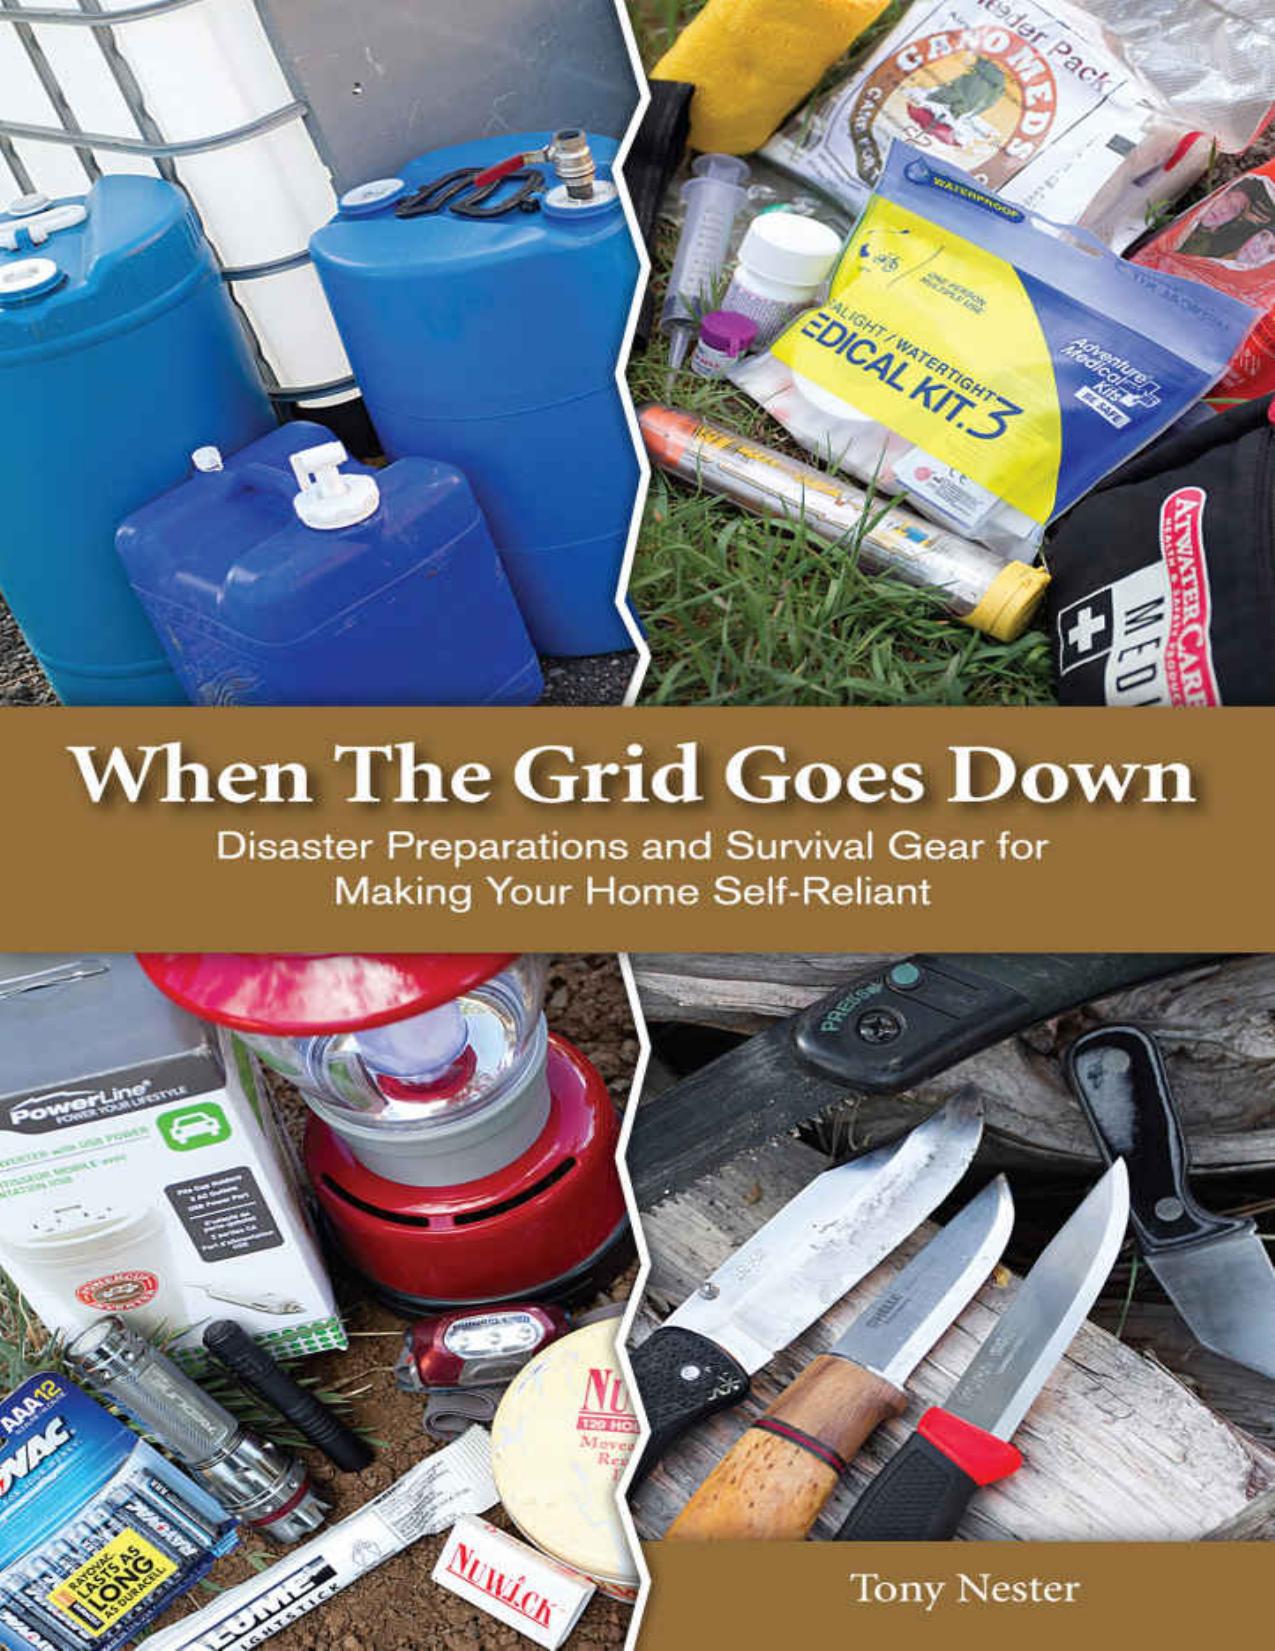 When the Grid Goes Down: Disaster Preparations and Survival Gear For Making Your Home Self-Reliant by Tony Nester